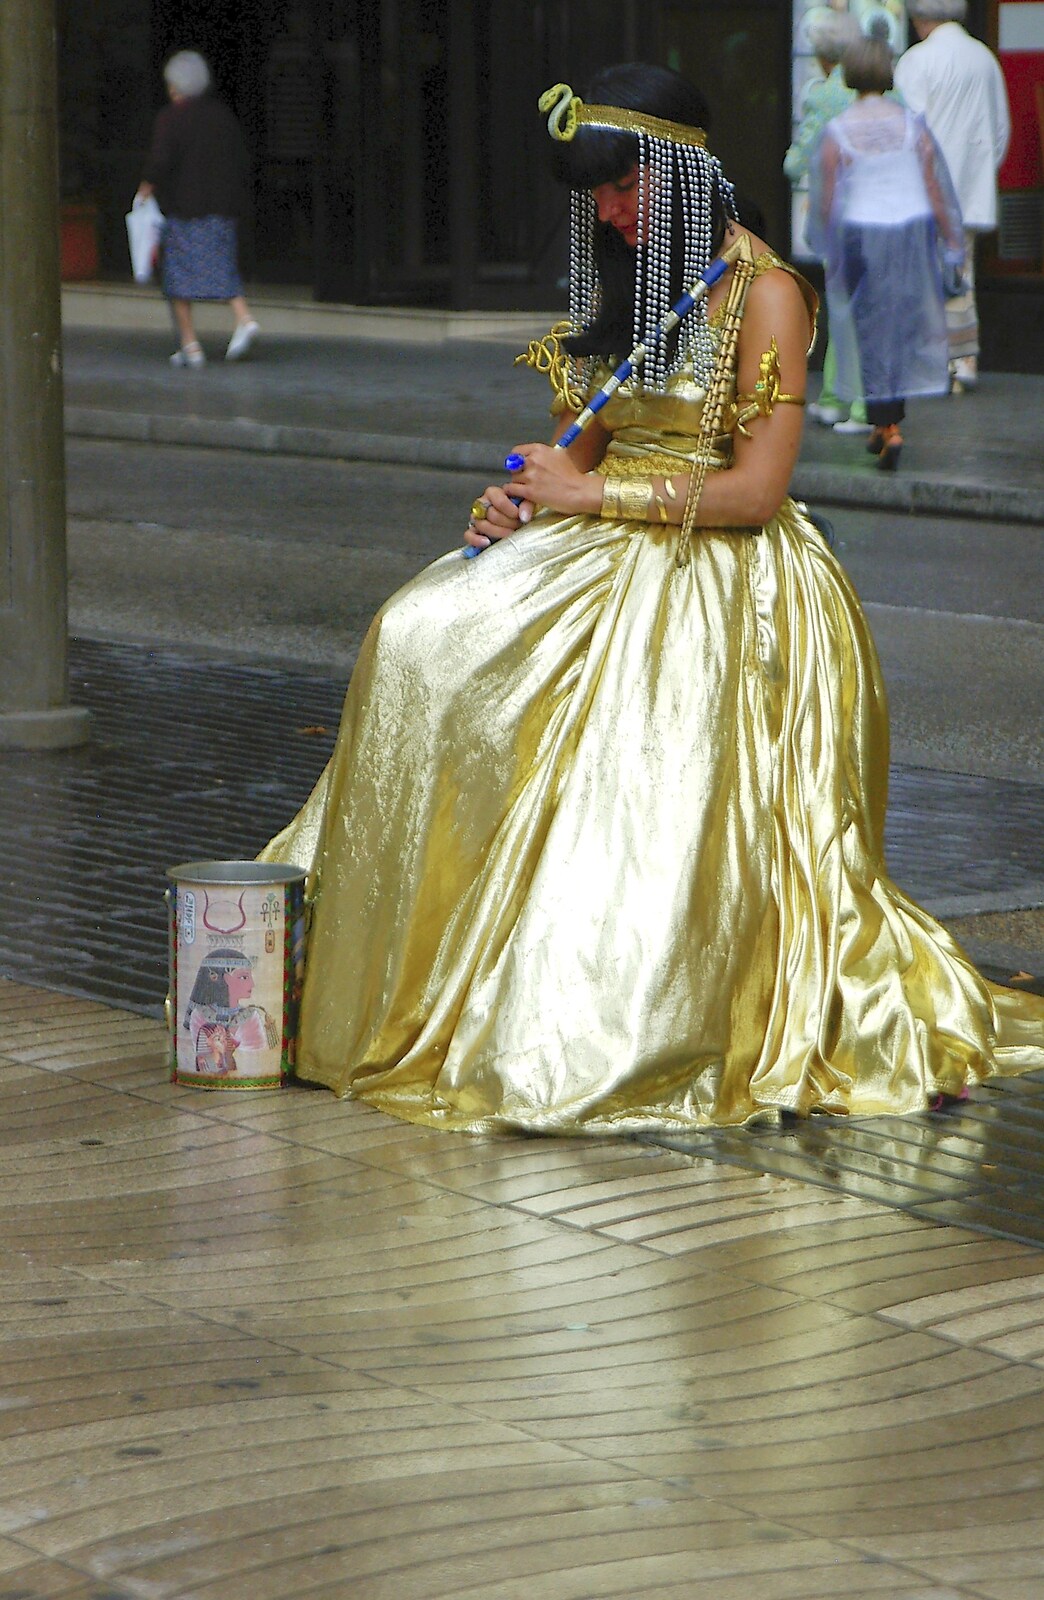 A Cleopatra sits and waits on La Rambla from Two Days in Barcelona, Catalunya, Spain - 22nd September 2006